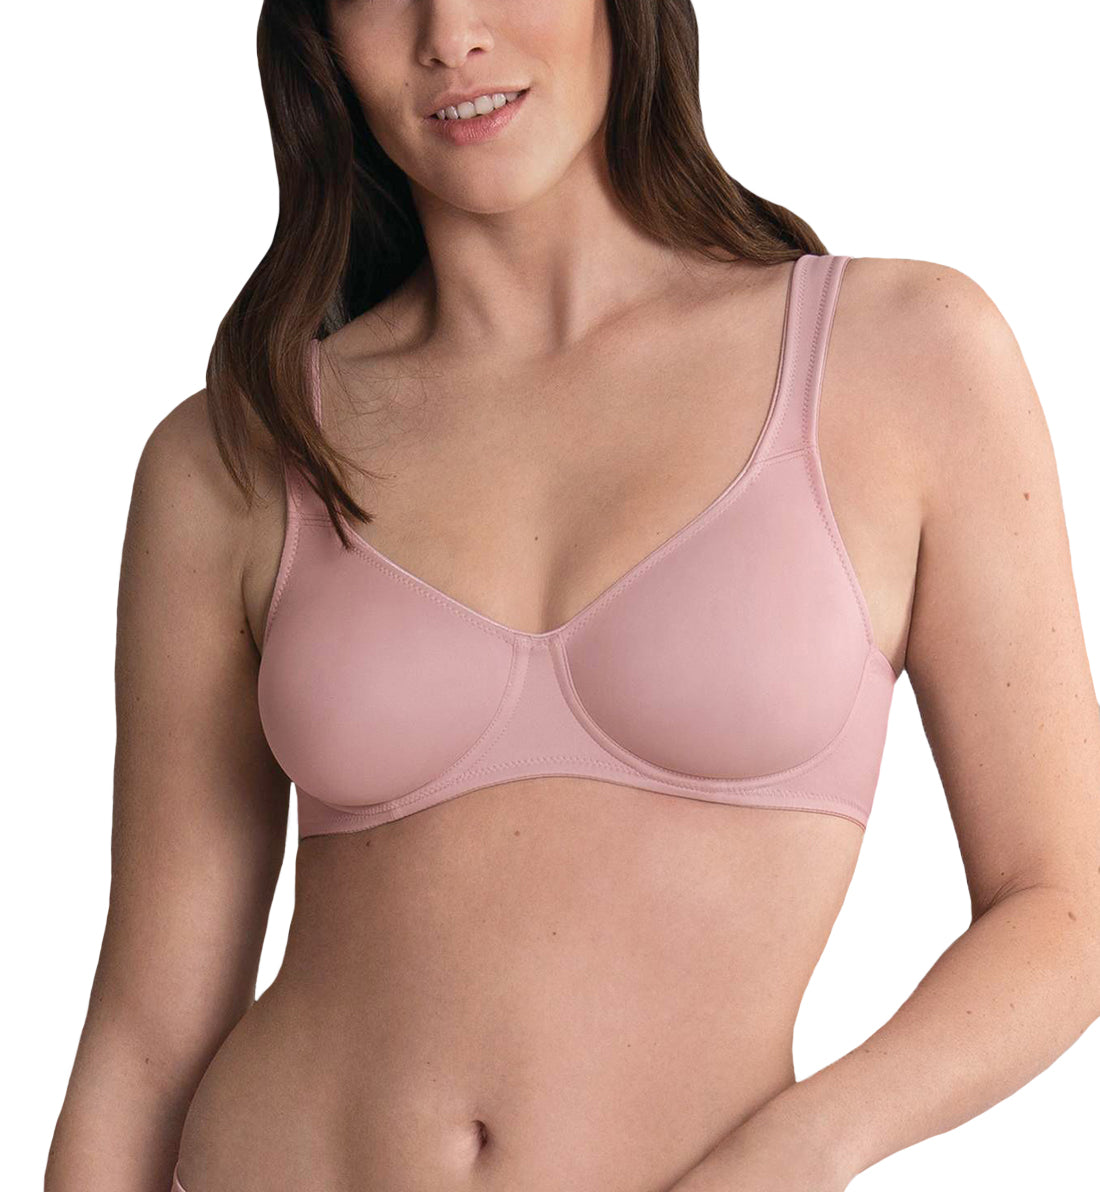 Rosa Faia by Anita Twin Seamless Underwire Bra (5490),30D,Rosewood - Rosewood,30D